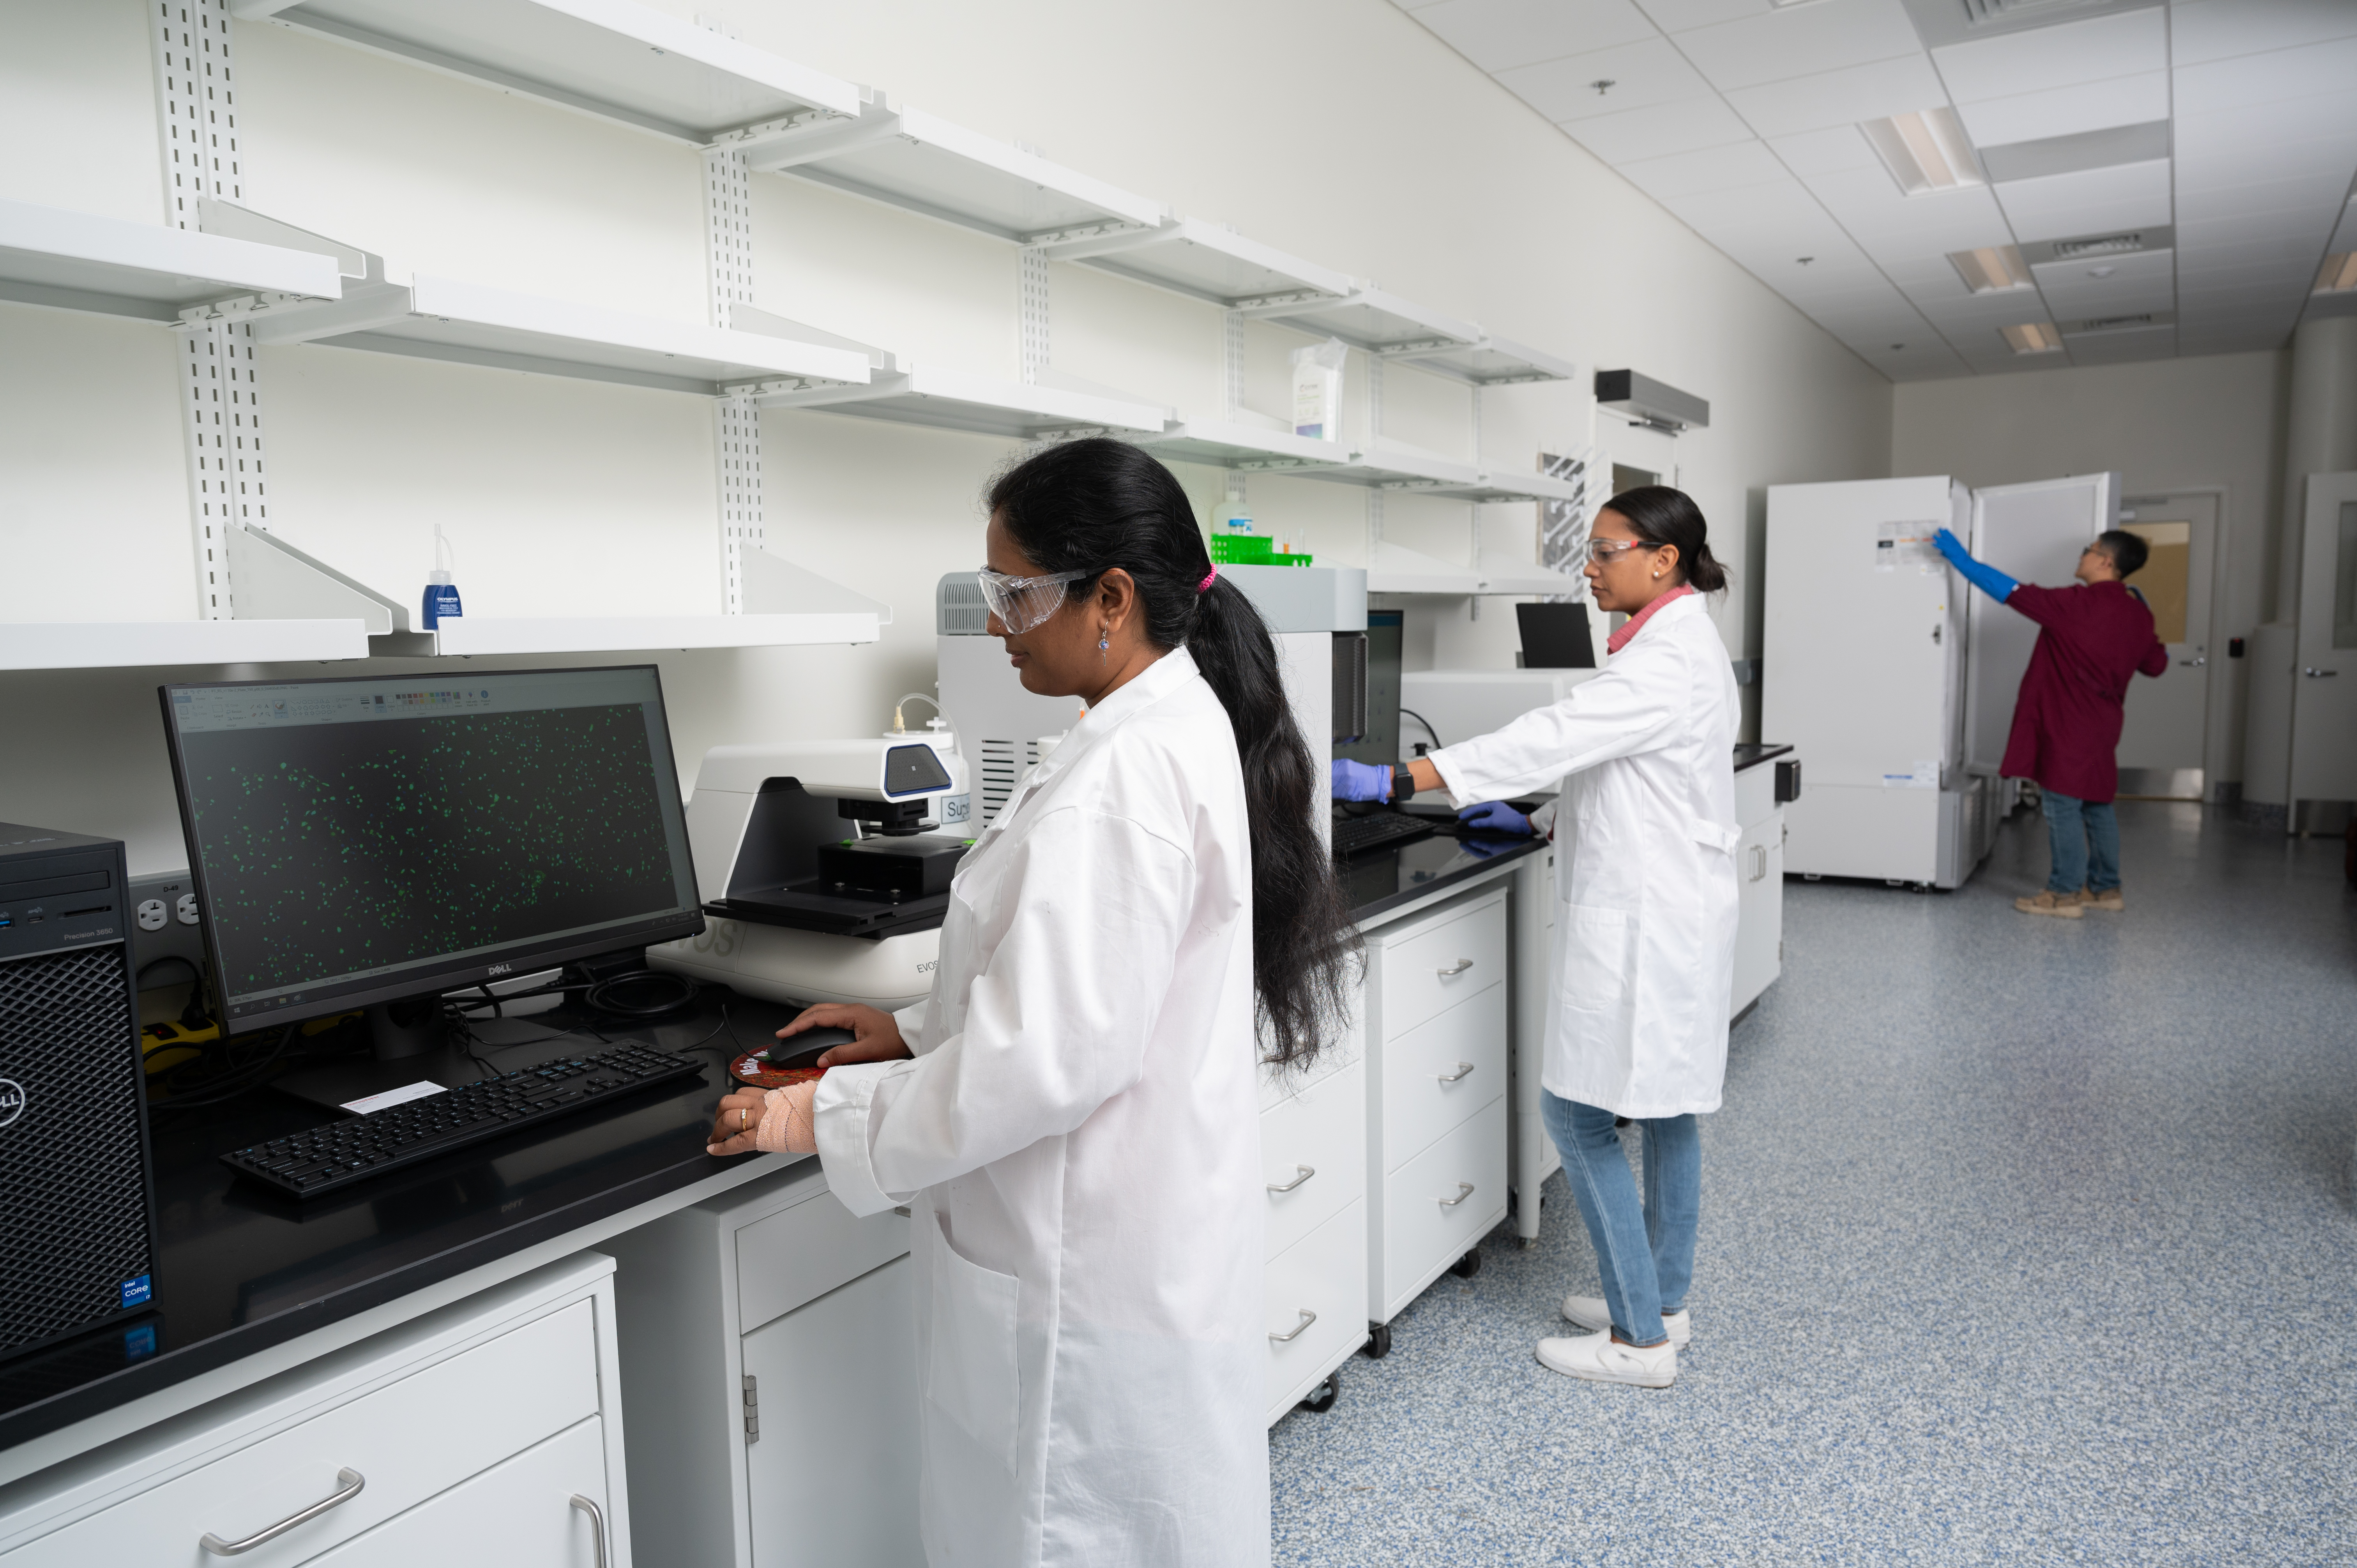 BioSpark Labs' members access shared equipment at no additional cost per usage. Featured equipment in this photo include EVOS M7000 fluorescent imaging system, Cytek Northern Lights 24-color spectral flow cytometry system, BioTek Synergy H1 microplate reader, and TSX -80C freezers.&nbsp;
